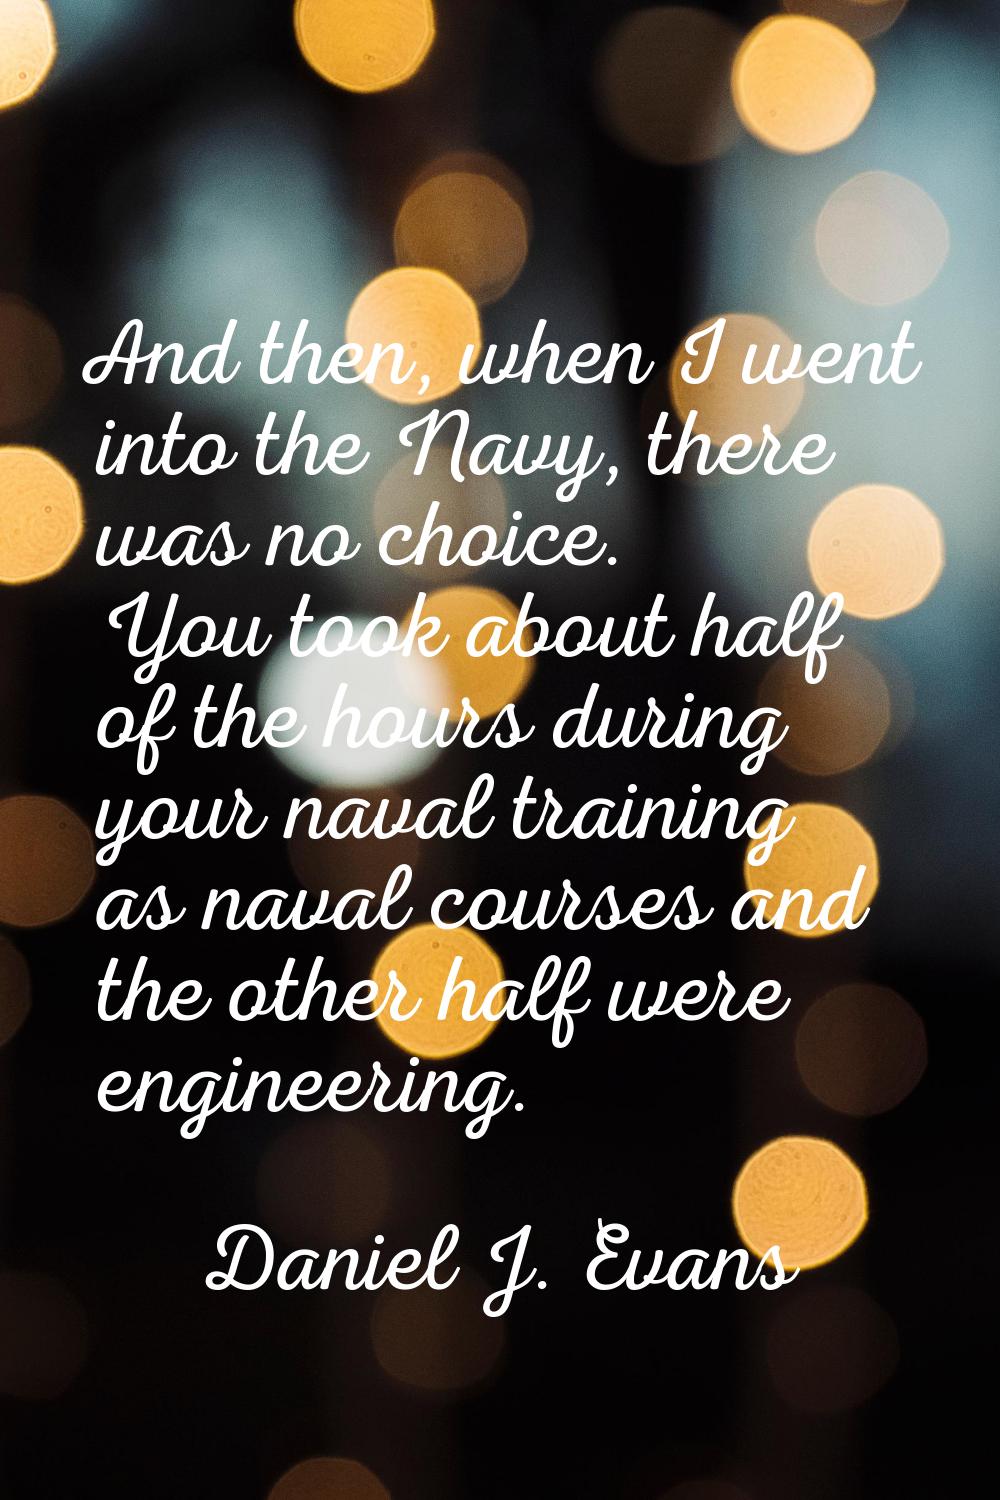 And then, when I went into the Navy, there was no choice. You took about half of the hours during y